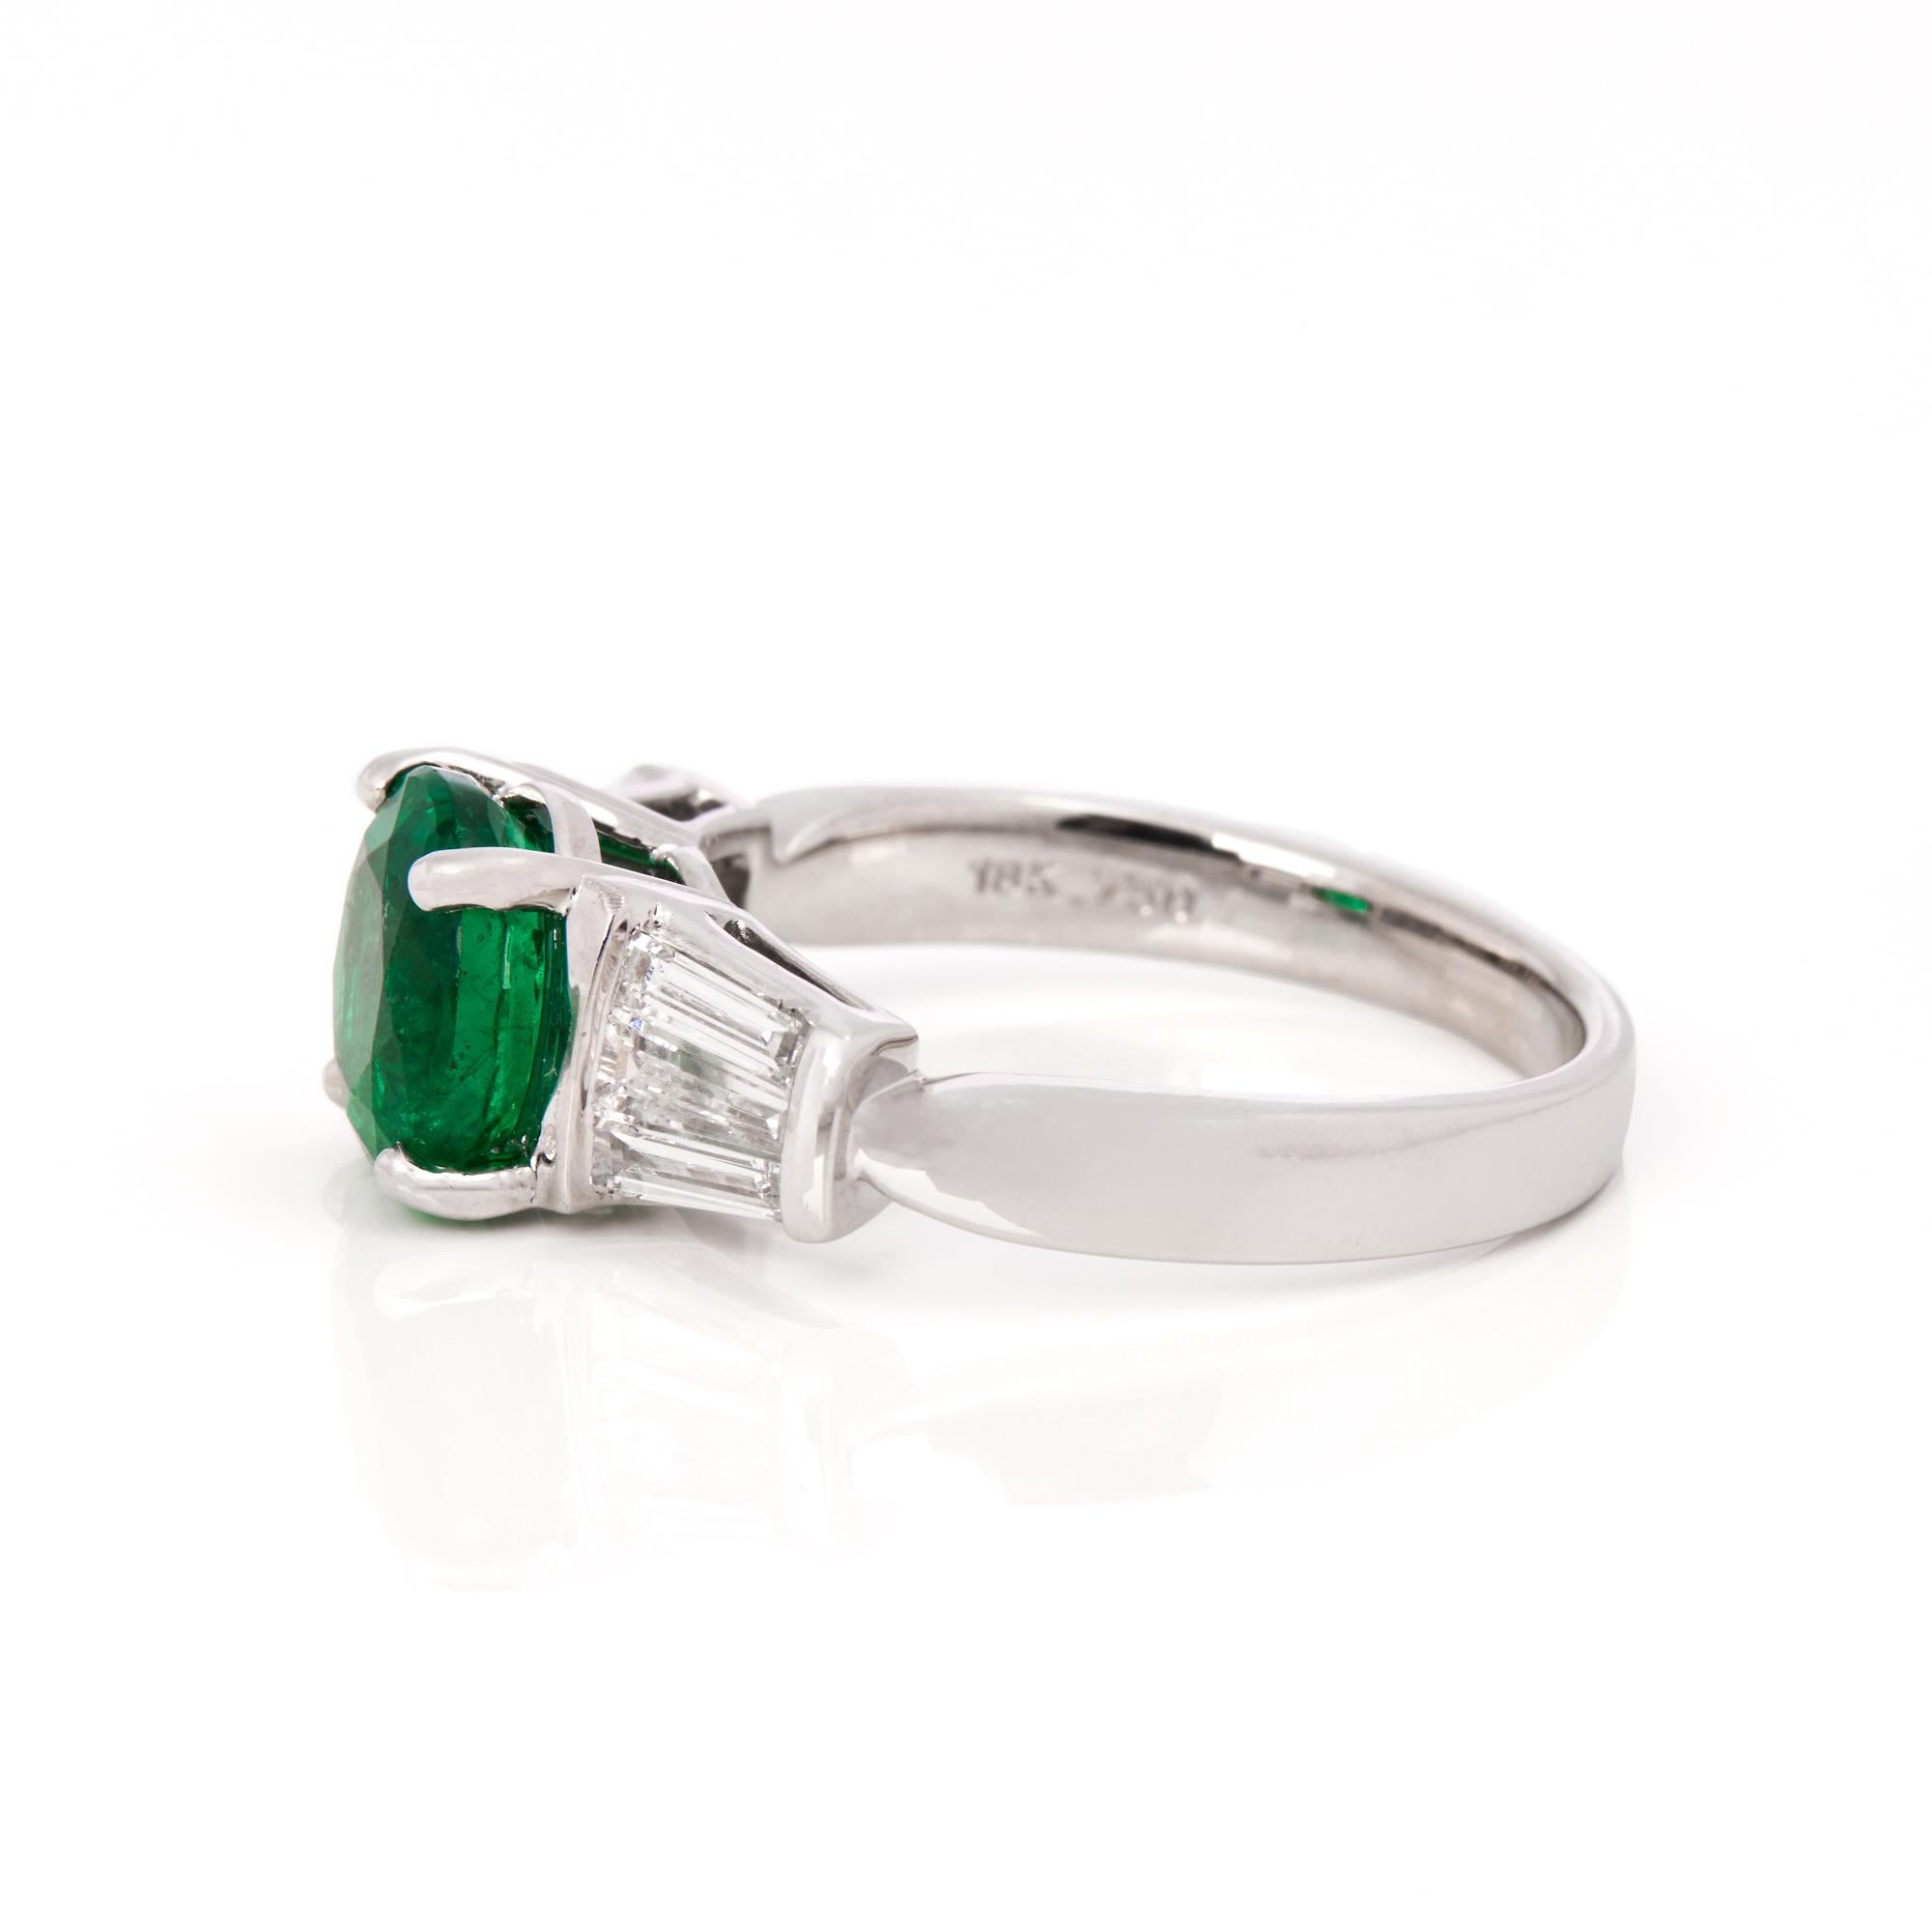 David Jerome Certified 1.91ct Round Cut Emerald and Diamond Ring In New Condition For Sale In Bishop's Stortford, Hertfordshire